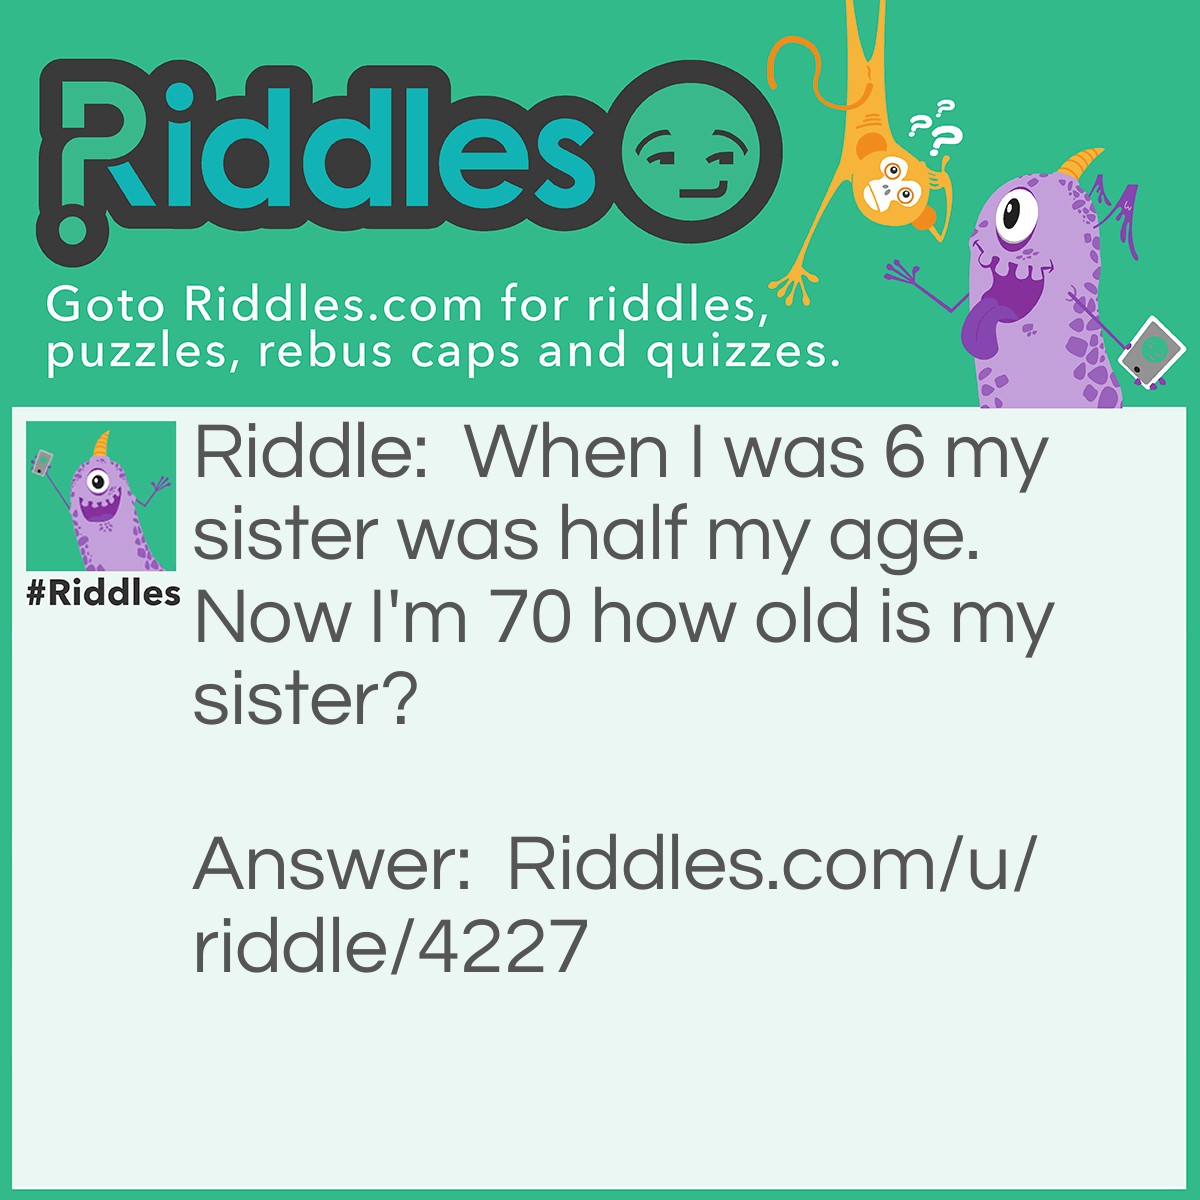 Riddle: When I was 6 my sister was half my age. Now I'm 70 how old is my sister? Answer: 67.